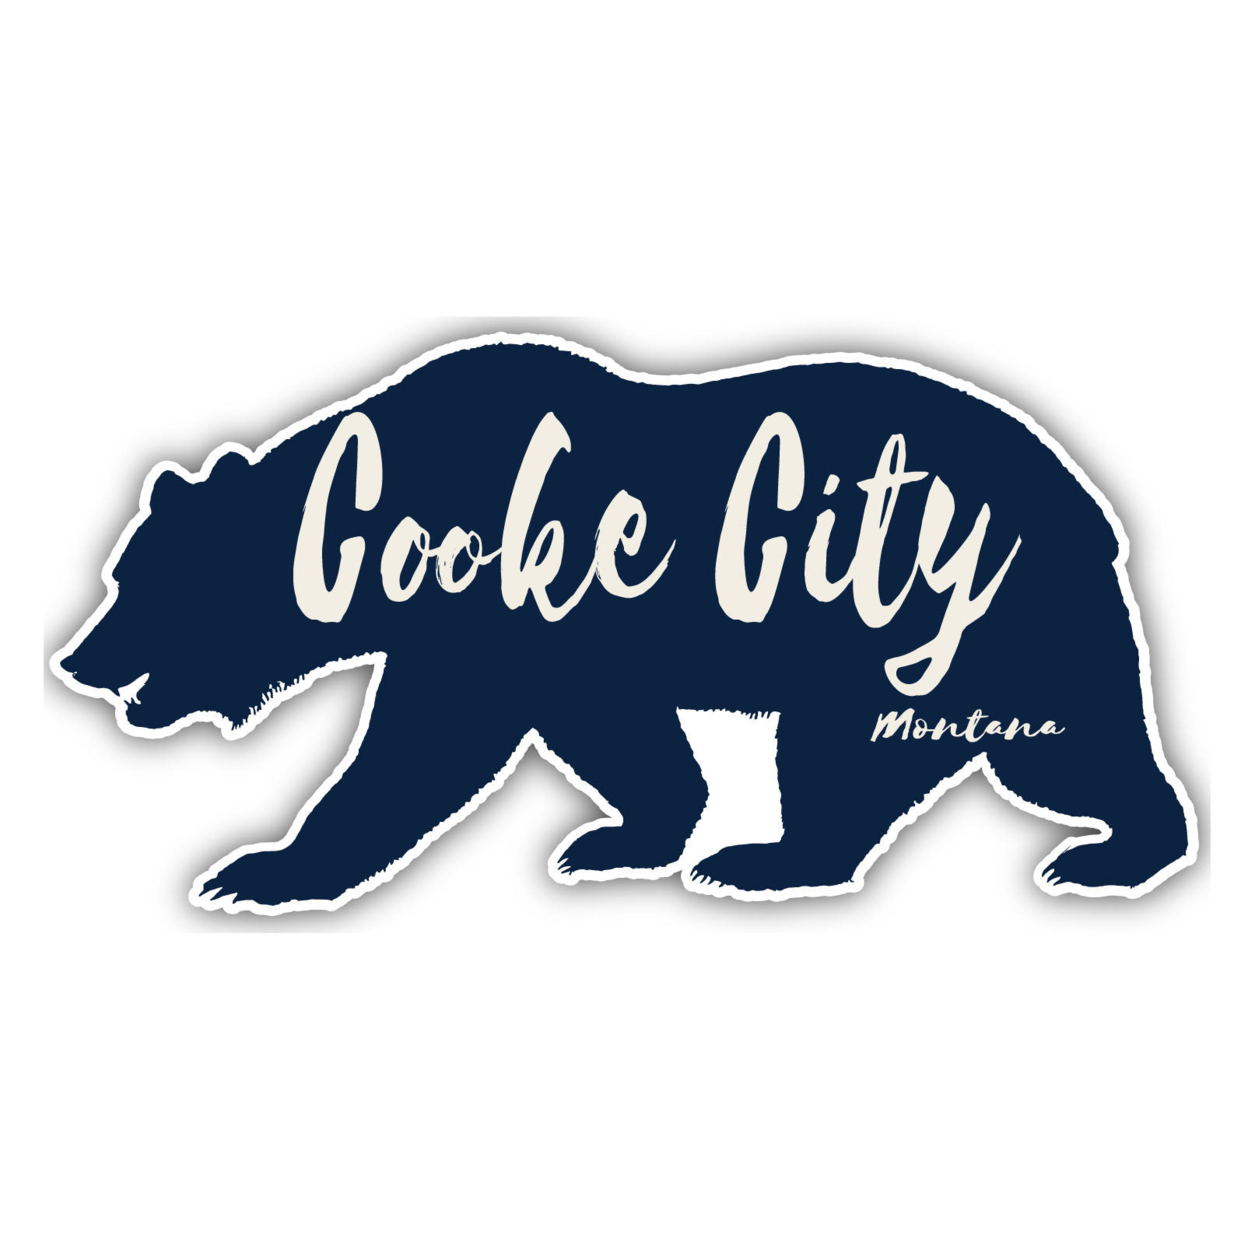 Cooke City Montana Souvenir Decorative Stickers (Choose Theme And Size) - Single Unit, 6-Inch, Great Outdoors